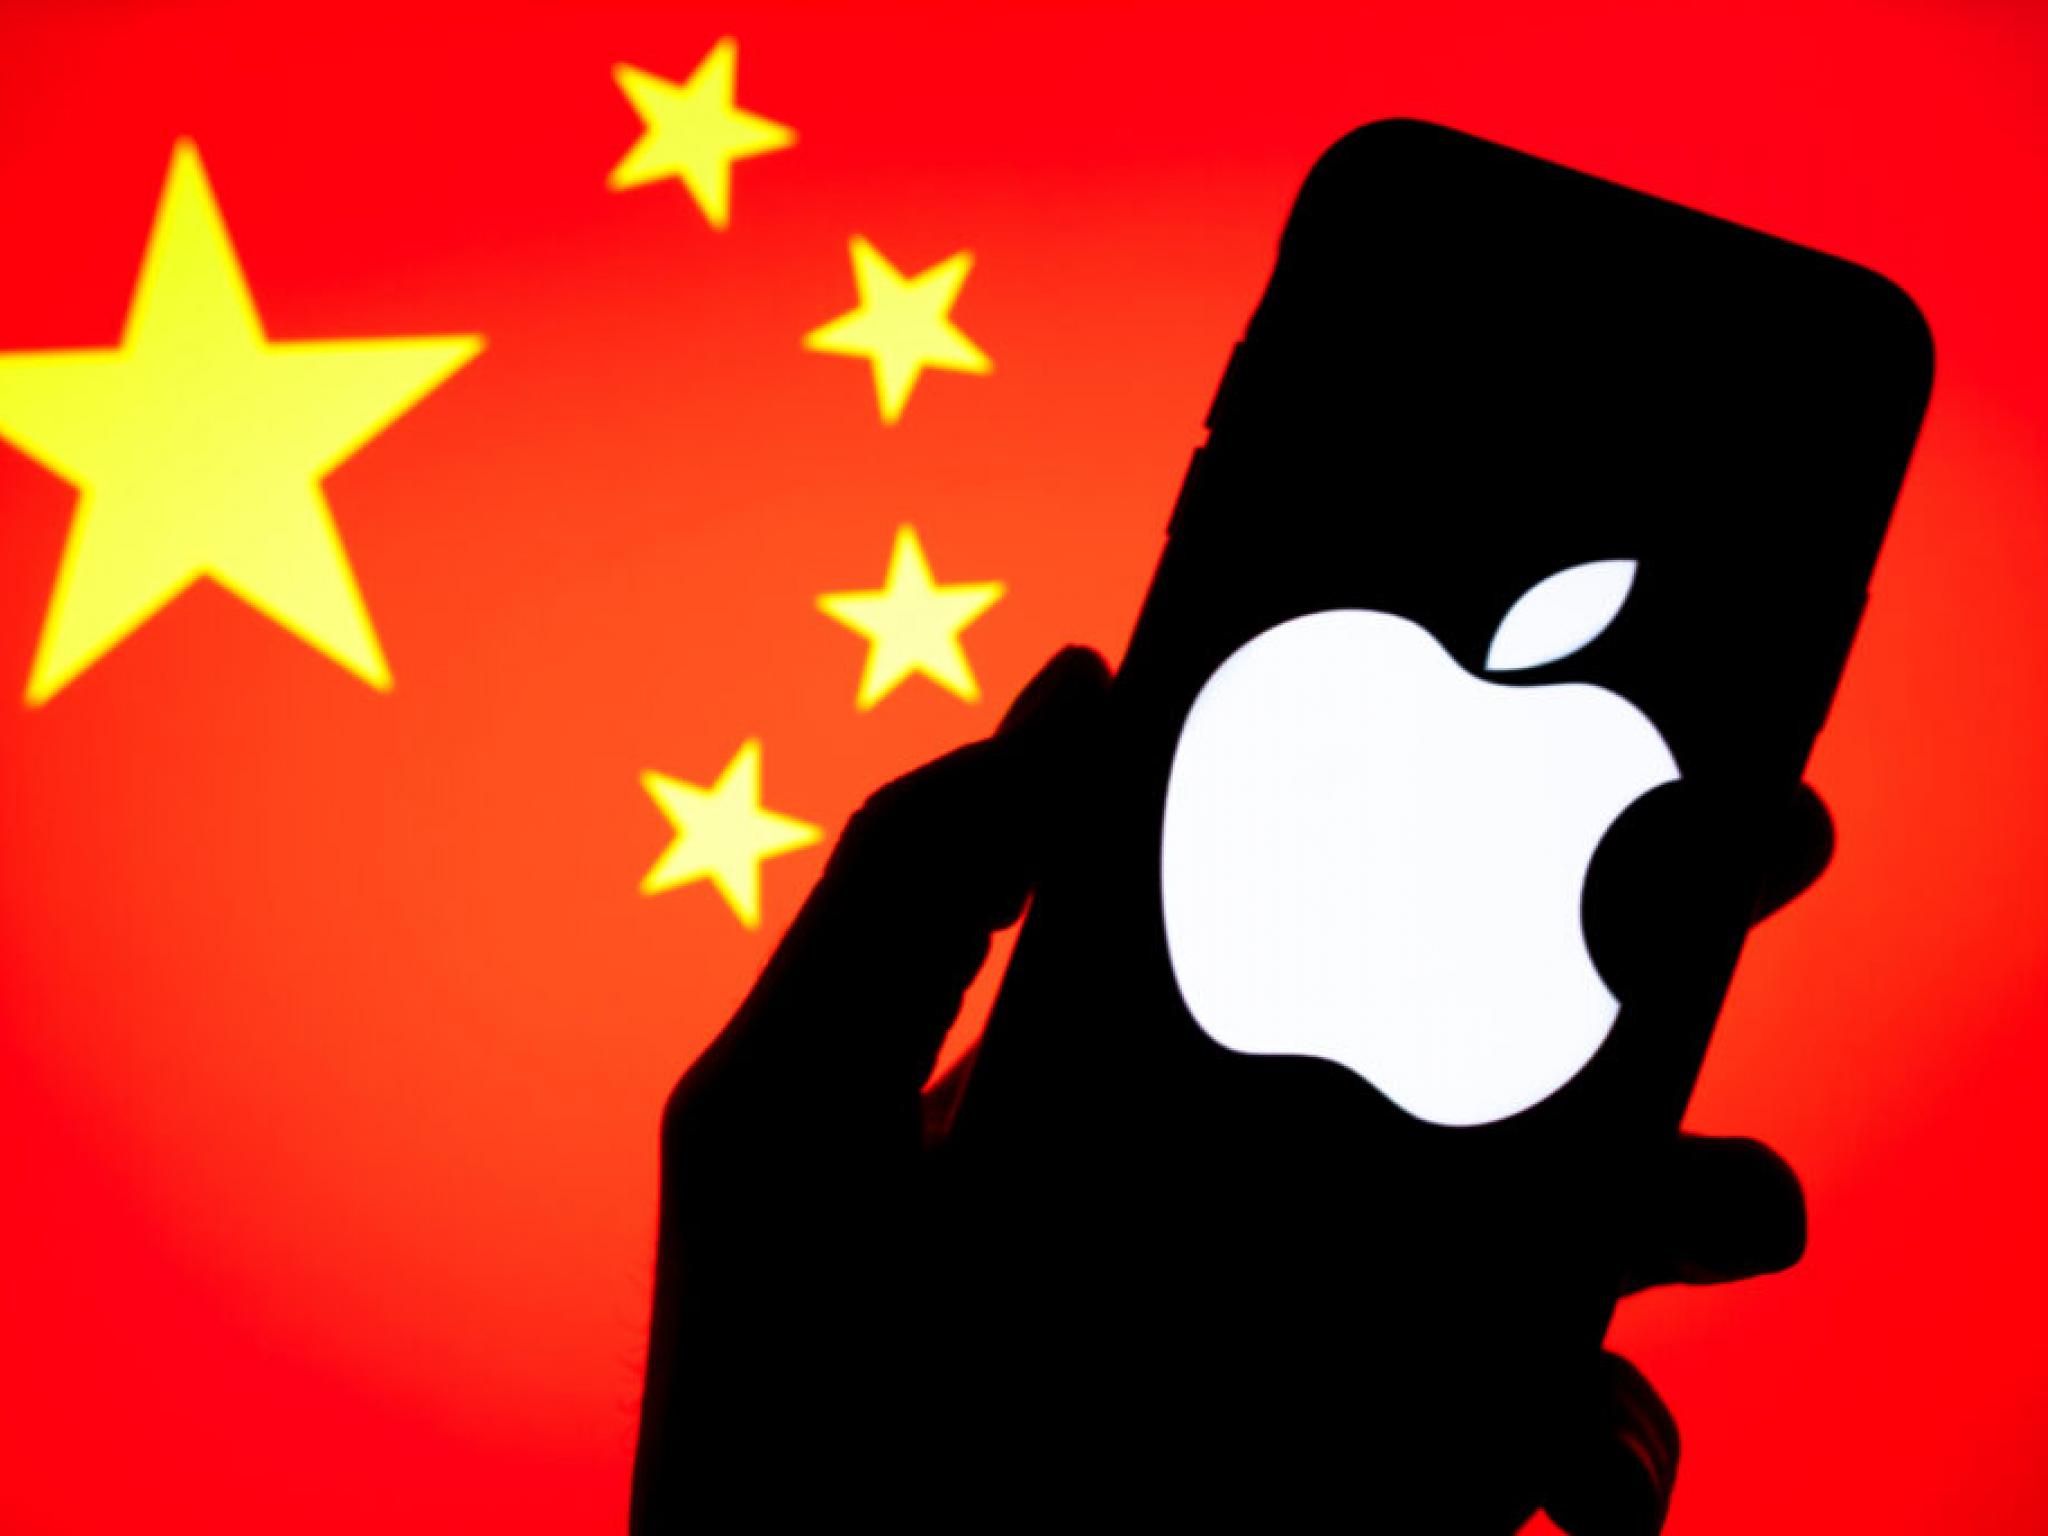  apple-drops-from-3rd-to-6th-in-china-amid-intensifying-competition-huawei-shipments-surge-41-in-q2-report 